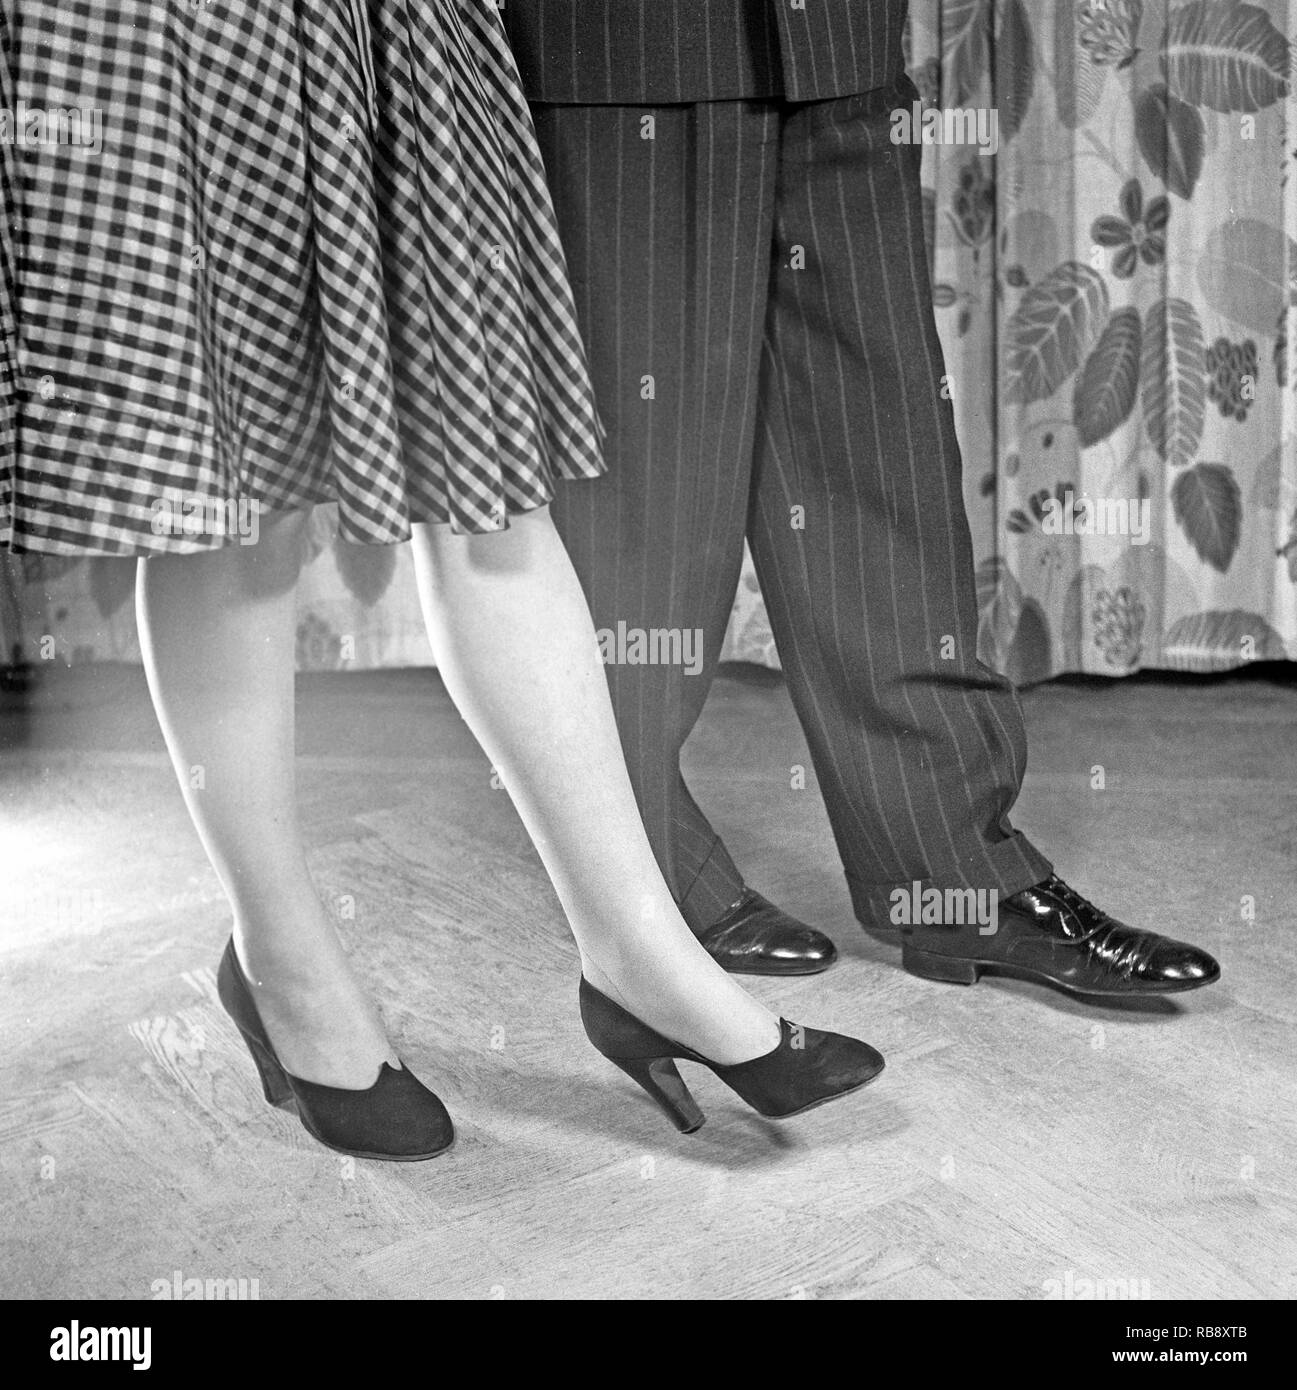 Learning to dance in the 1940s. A close up of a man and a women's legs and feet when dancing. An instructiv image on how to position and move to the music, although which dance they are dancing is not known. Sweden 1946. Photo: Kristoffersson ref Y56-2 Stock Photo